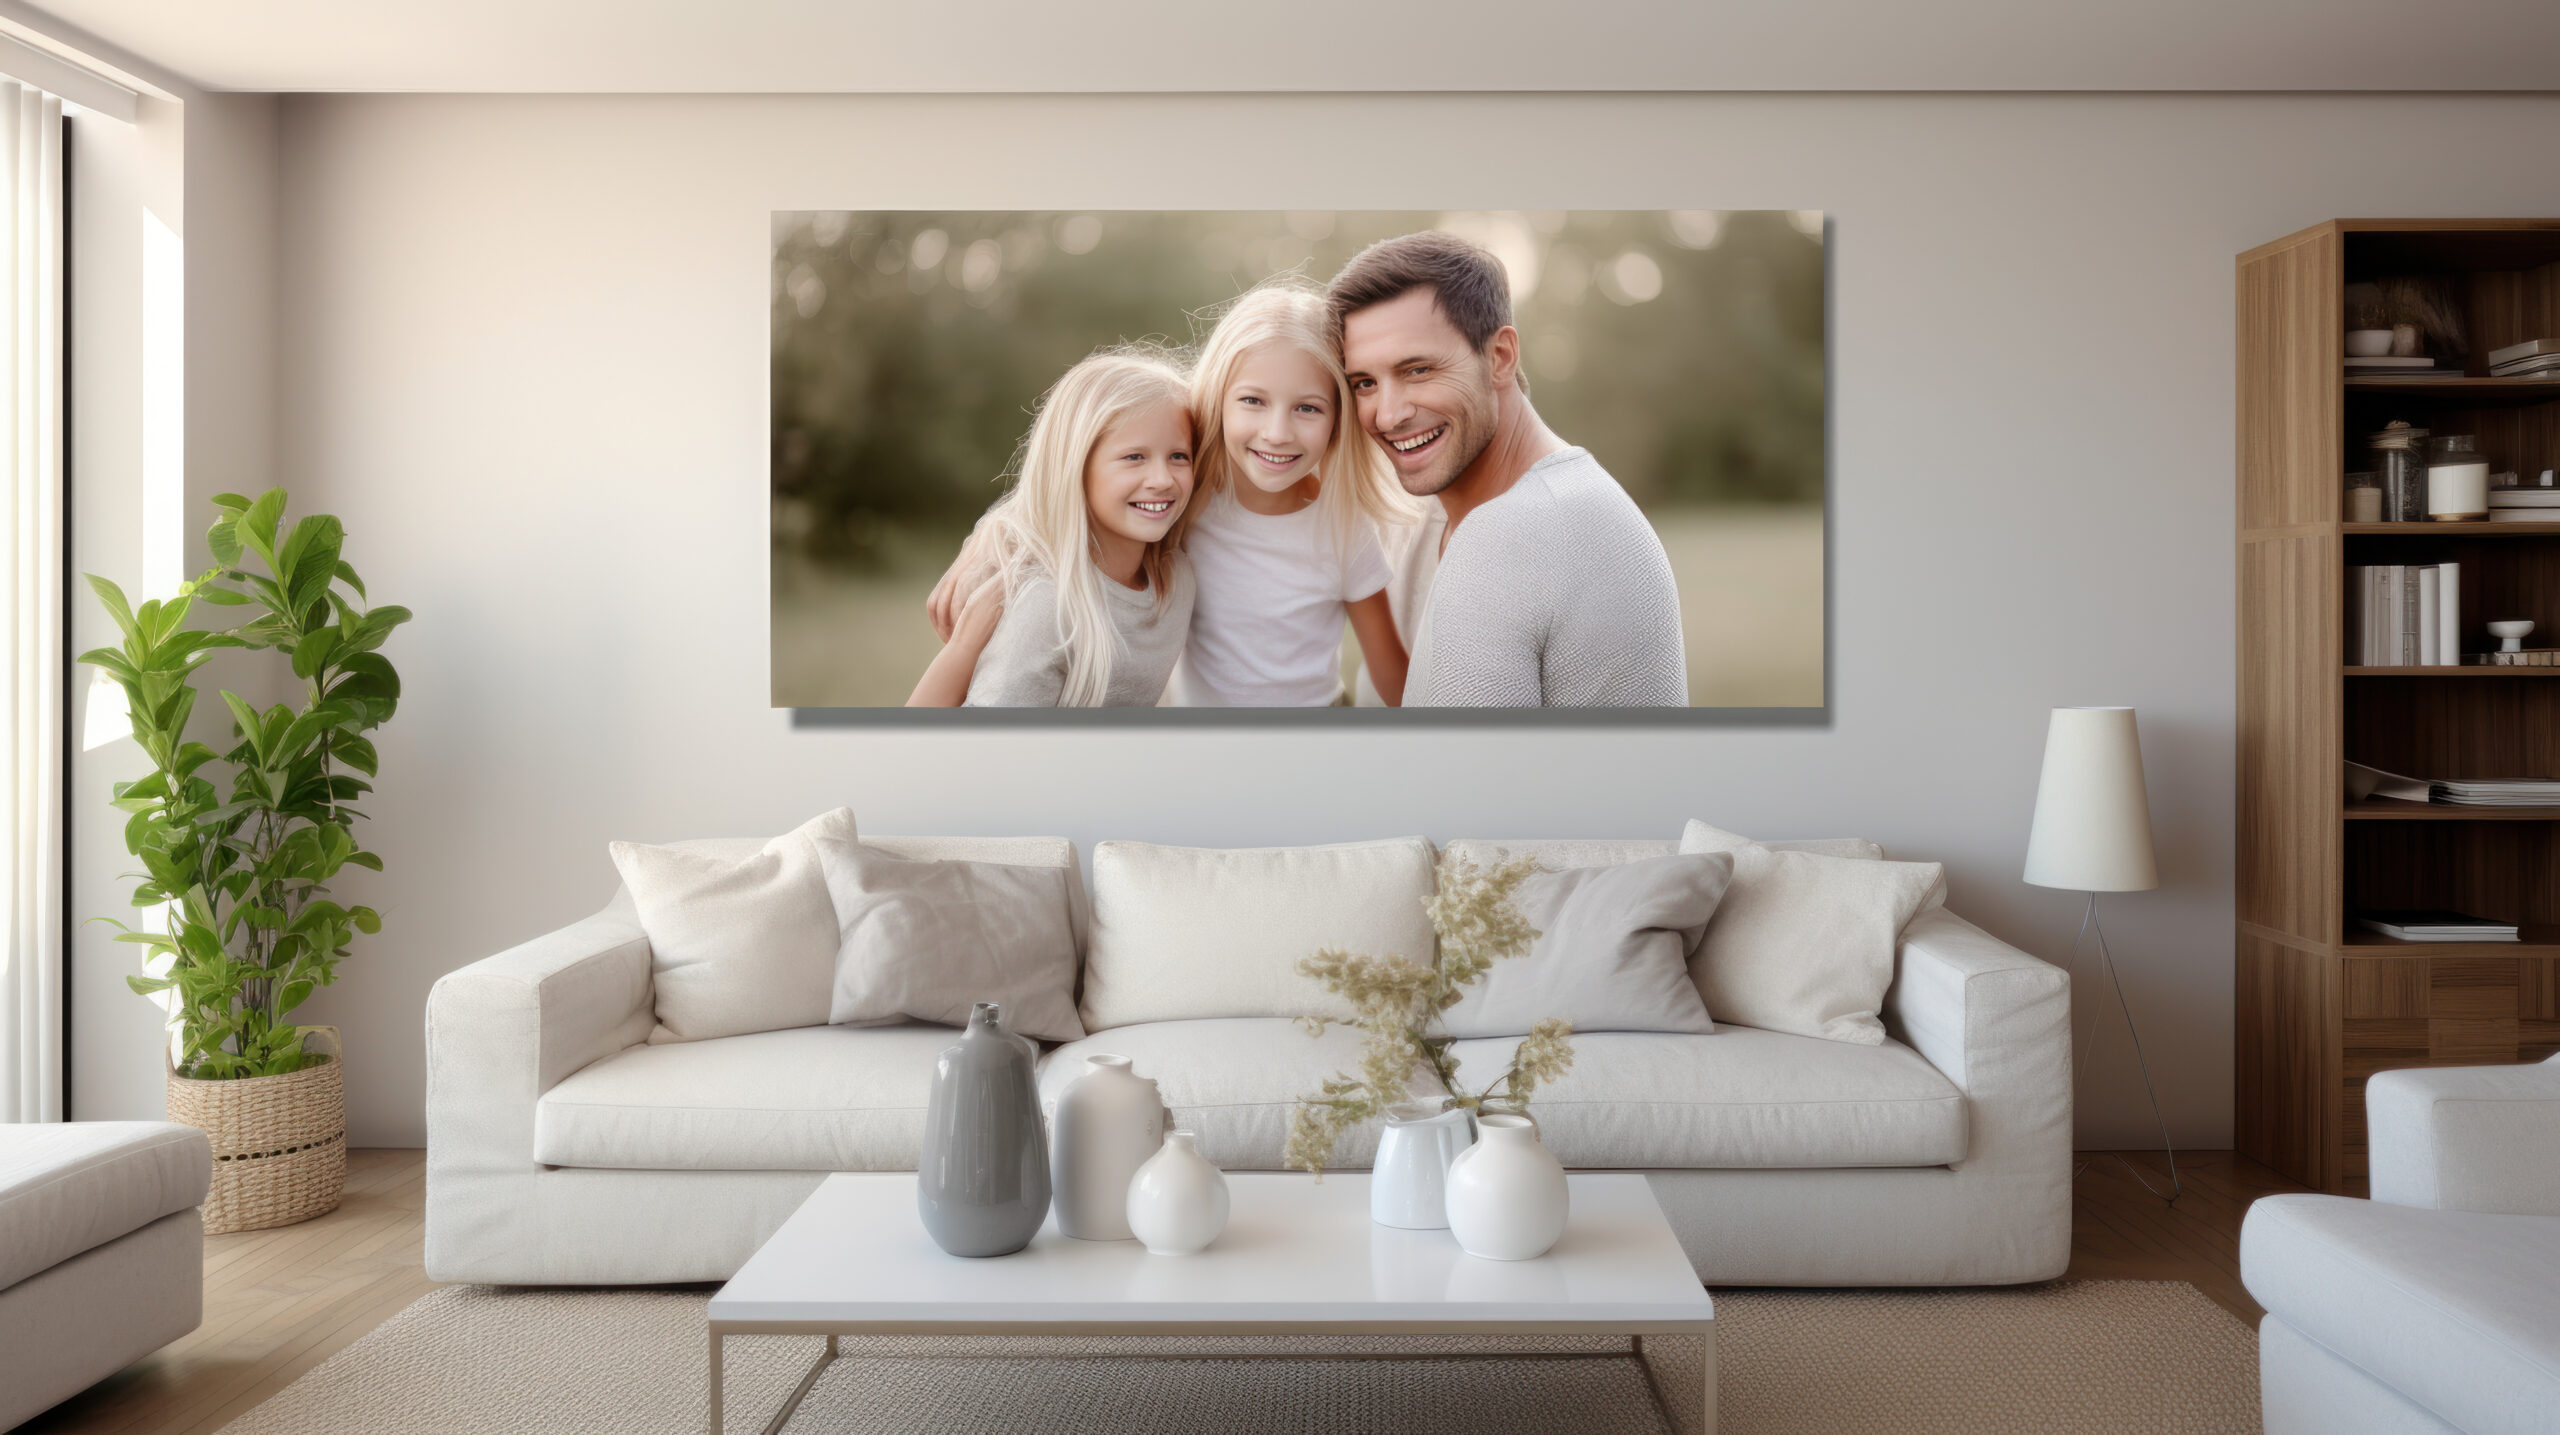 Your Ultimate Guide to Photo Print Services